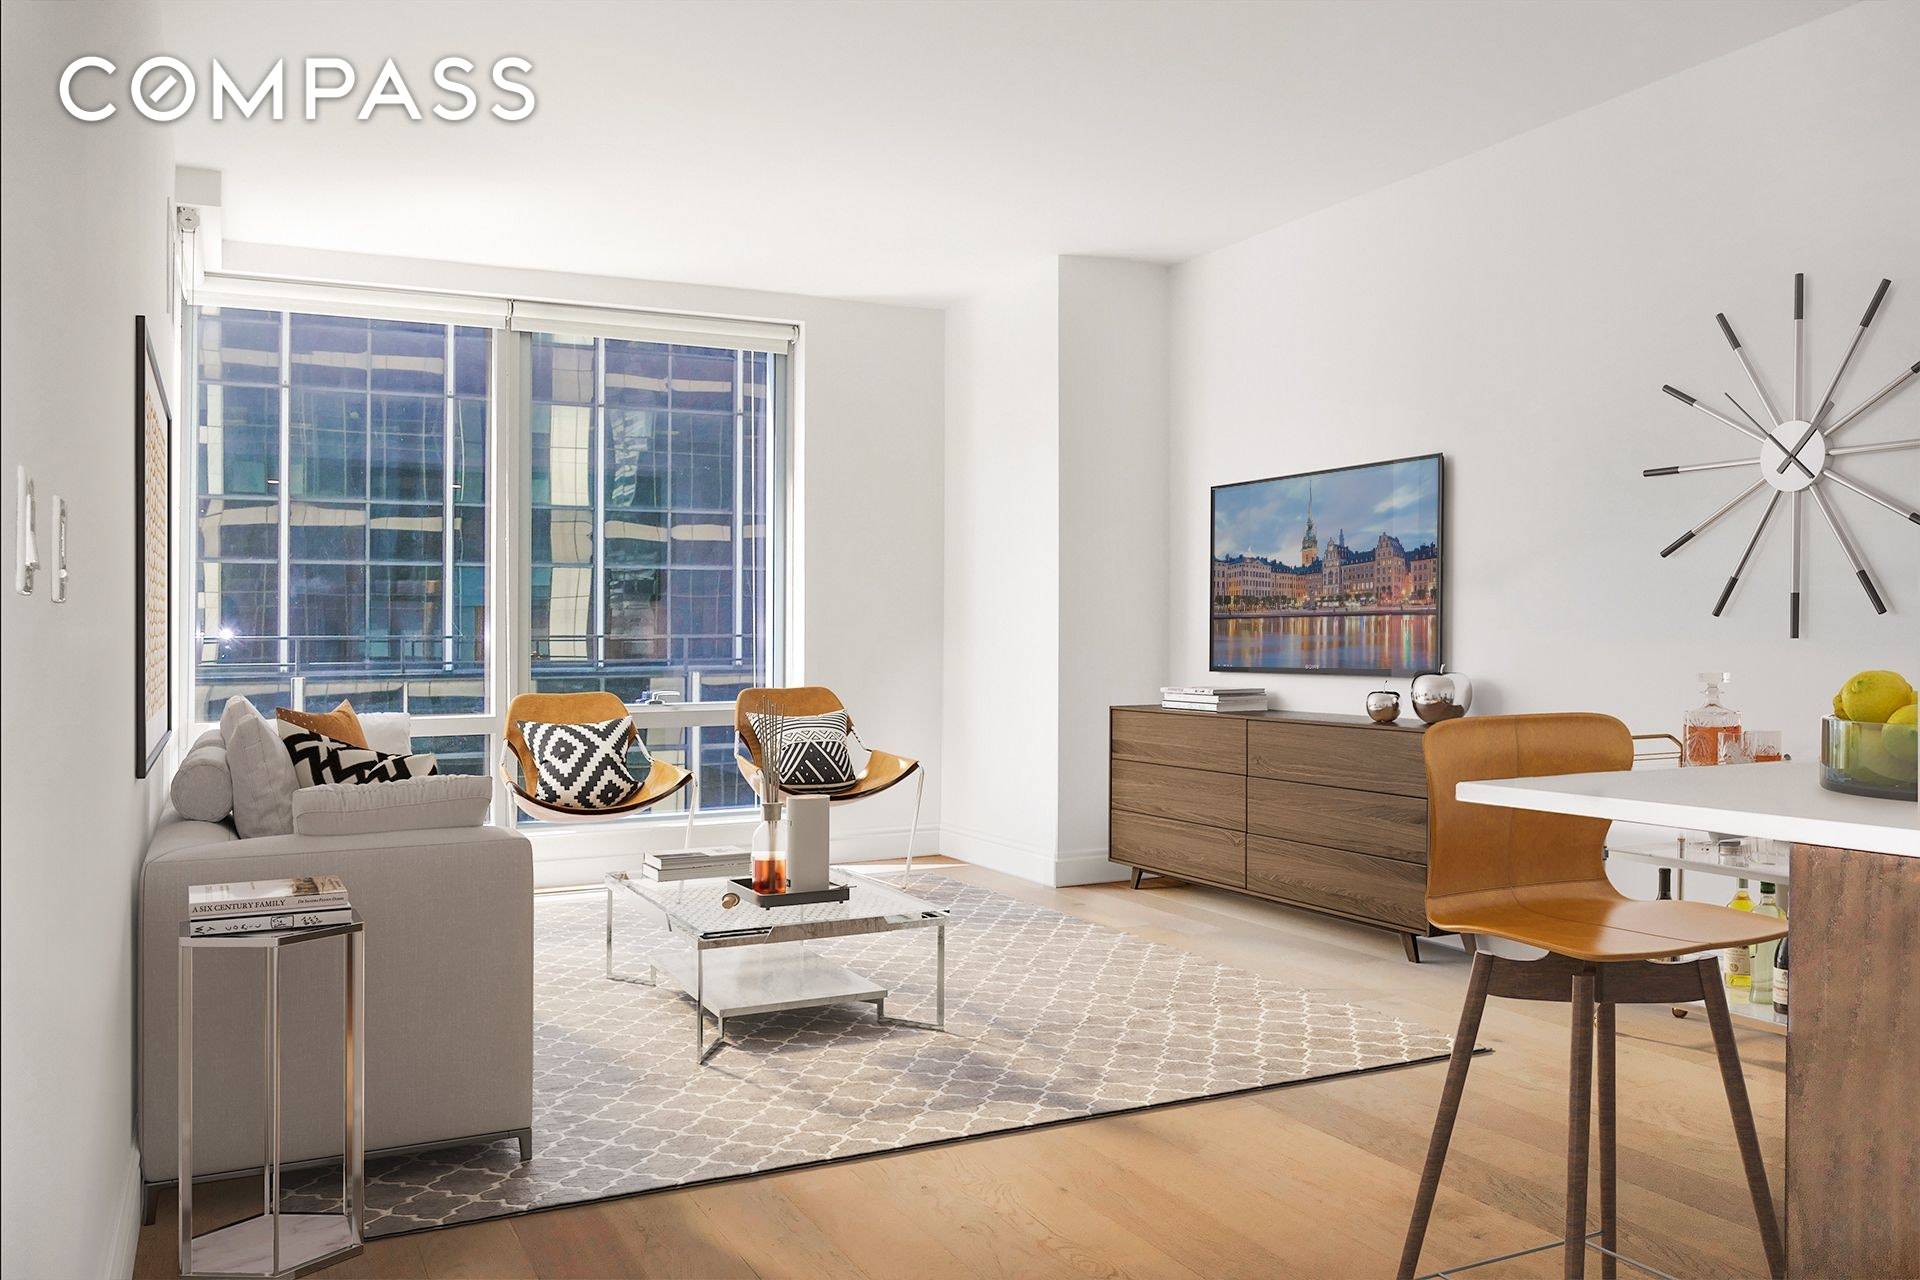 New 1 bedroom with corner floor to ceiling living room window, gourmet chef's kitchen with Caesarstone countertops, stainless steel appliances and eating bar, and two walk in closets.